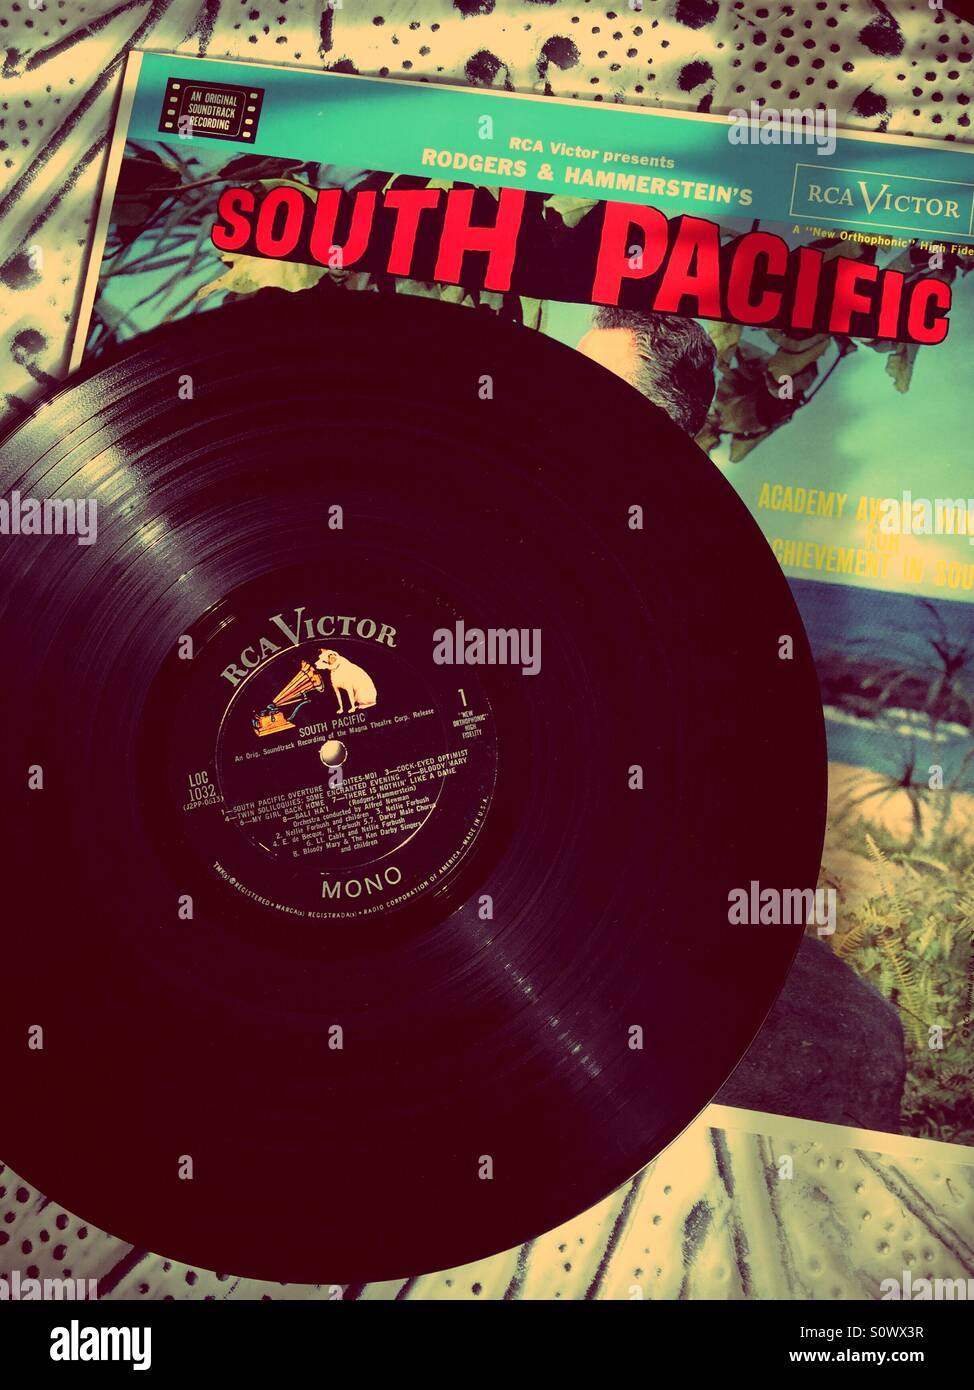 Vintage sound track record and sleeve from the Broadway show and movie South Pacific Stock Photo